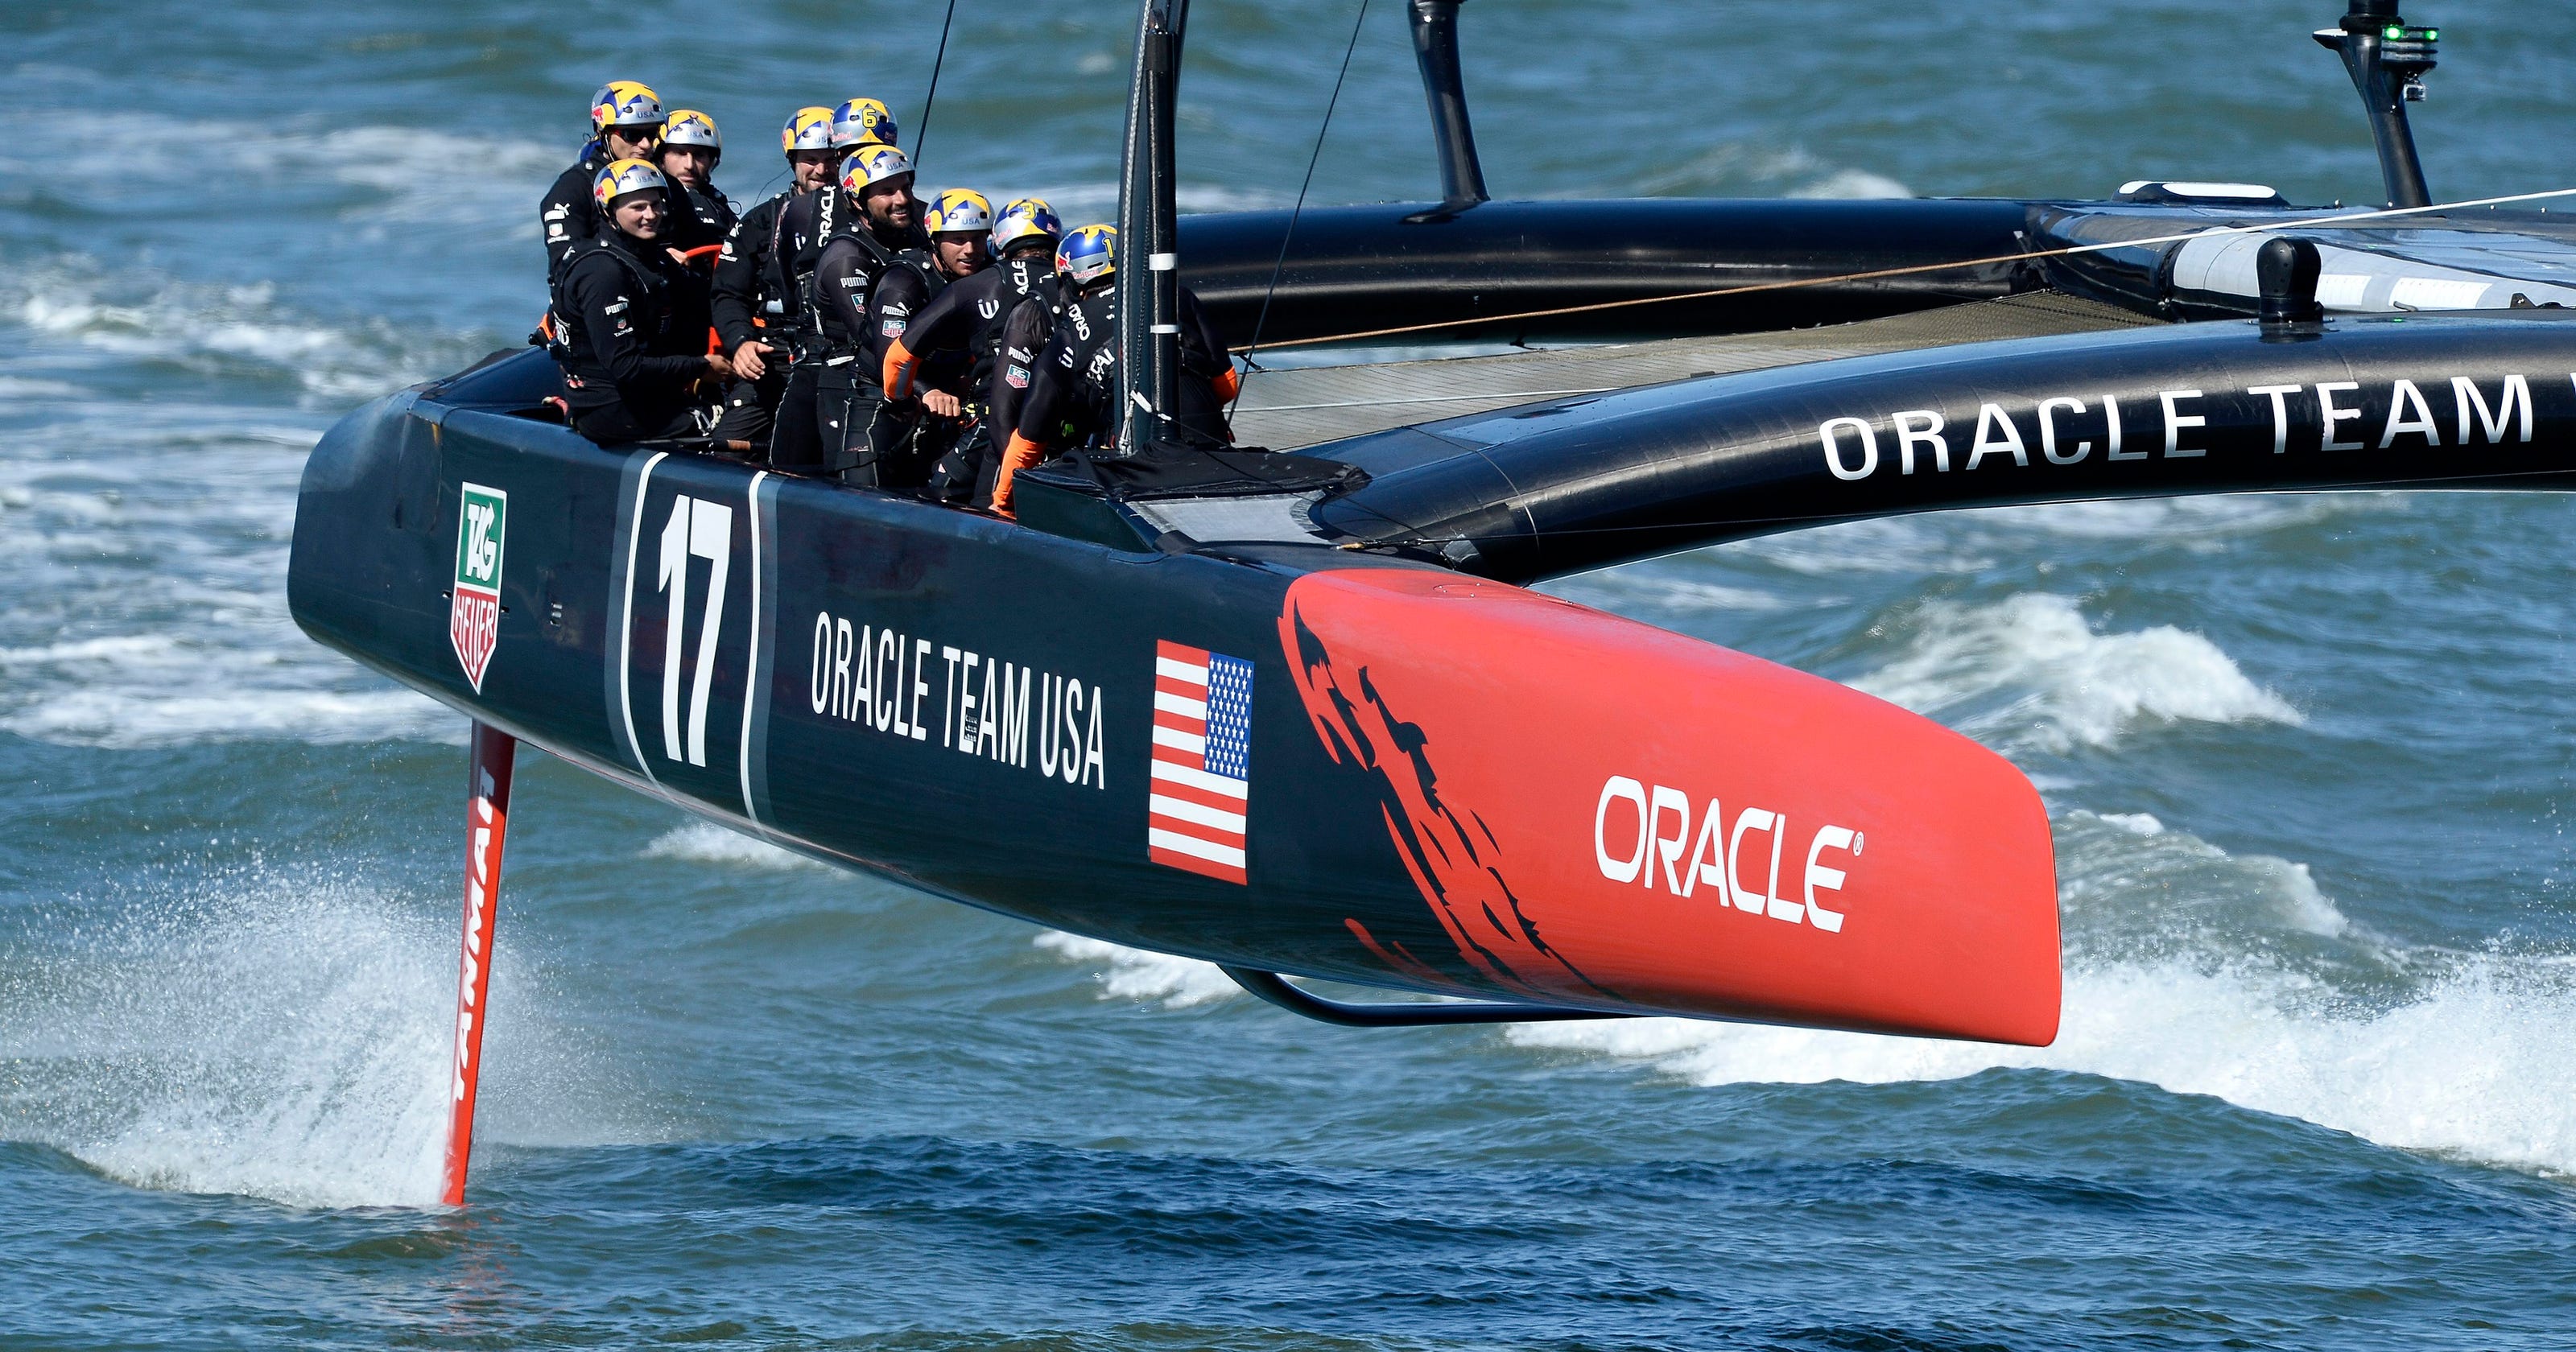 Oracle Team USA has momentum in America's Cup